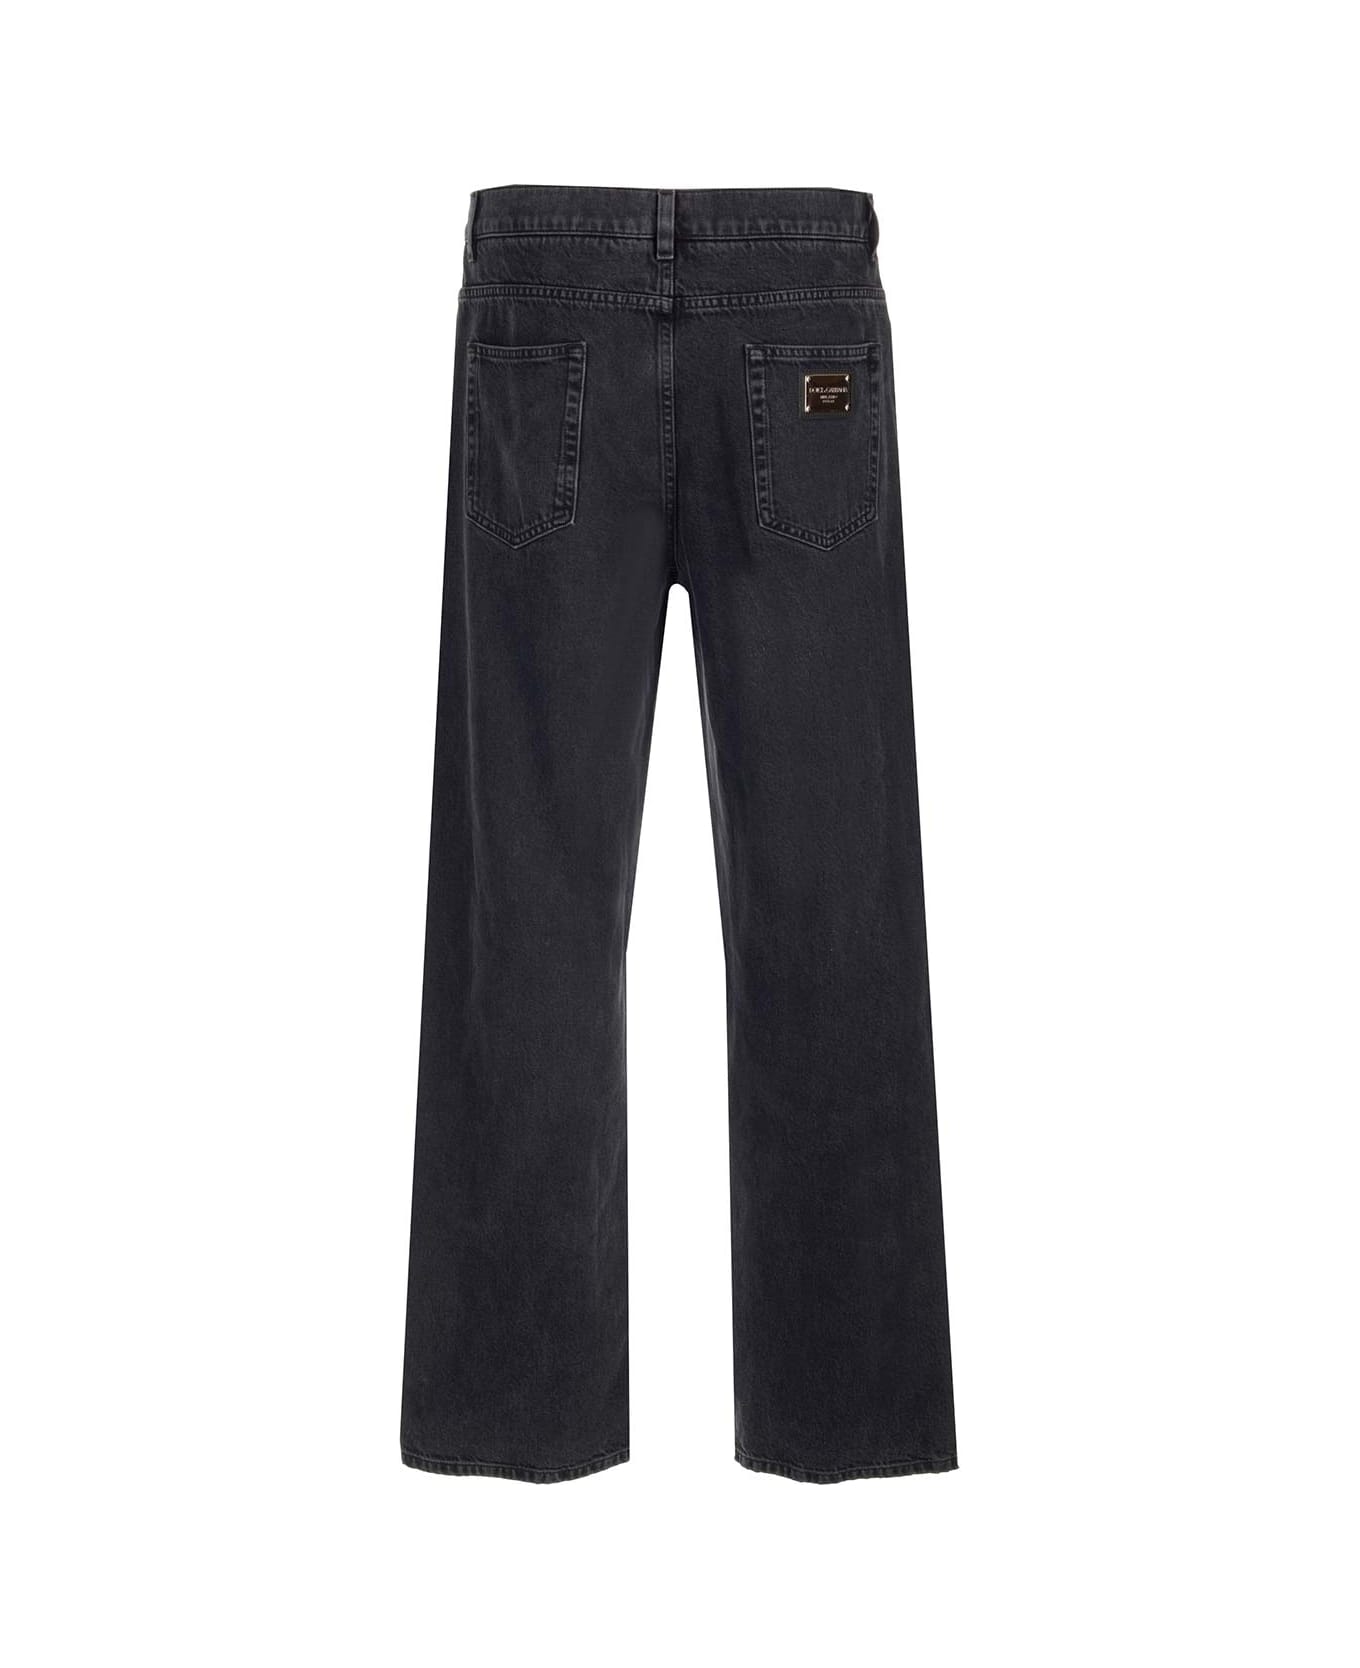 Dolce & Gabbana Loose-fit Jeans - Black ボトムス